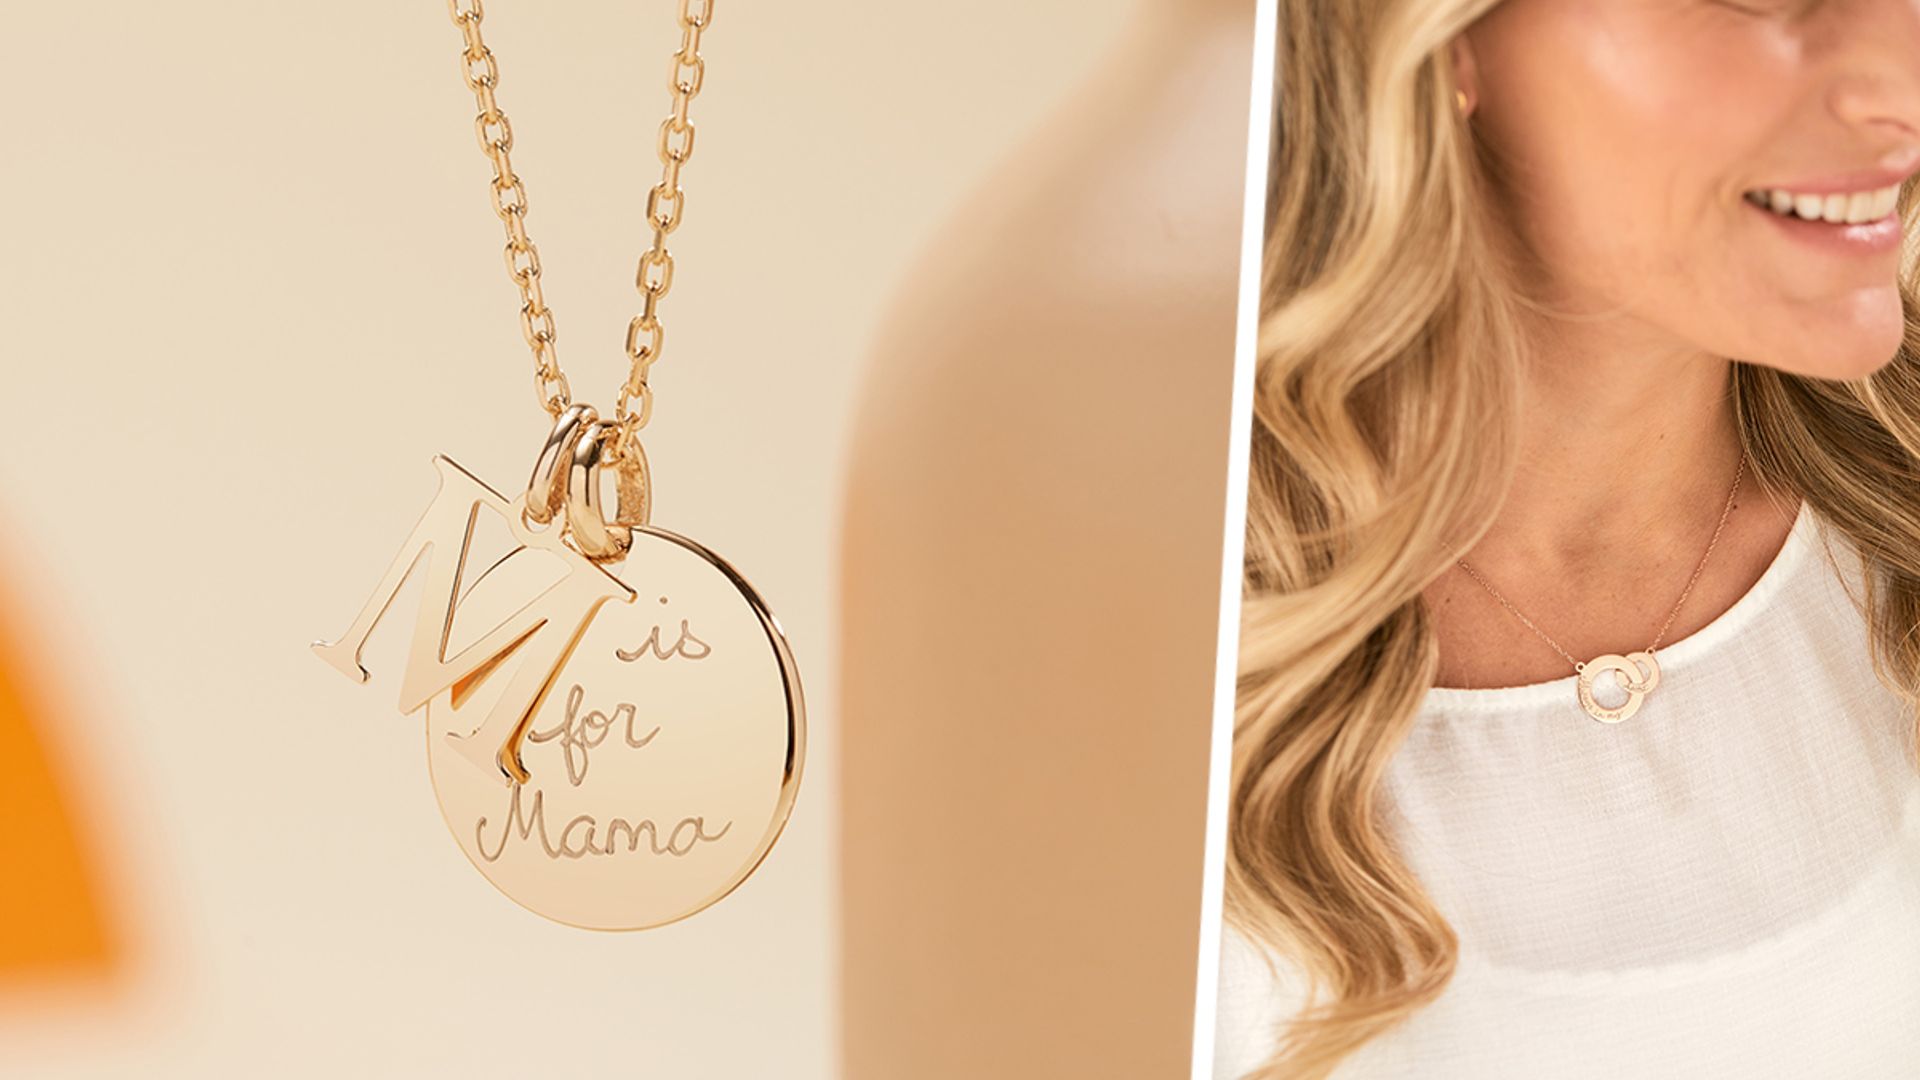 Our edit of the best personalized jewelry from Merci Maman your mom will love